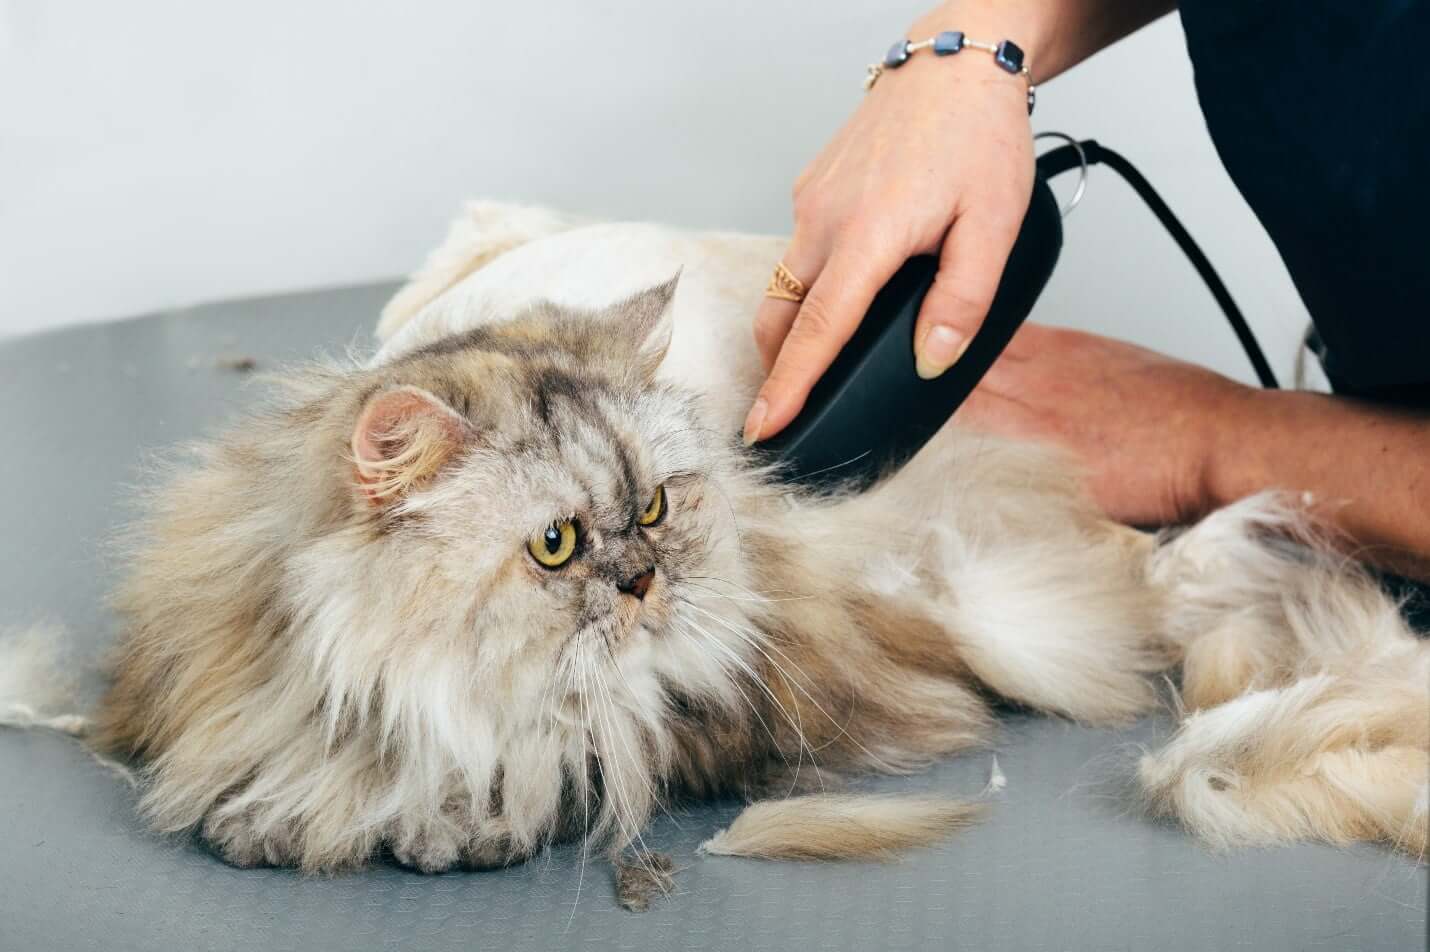 long-haired cat being groomed with clippers